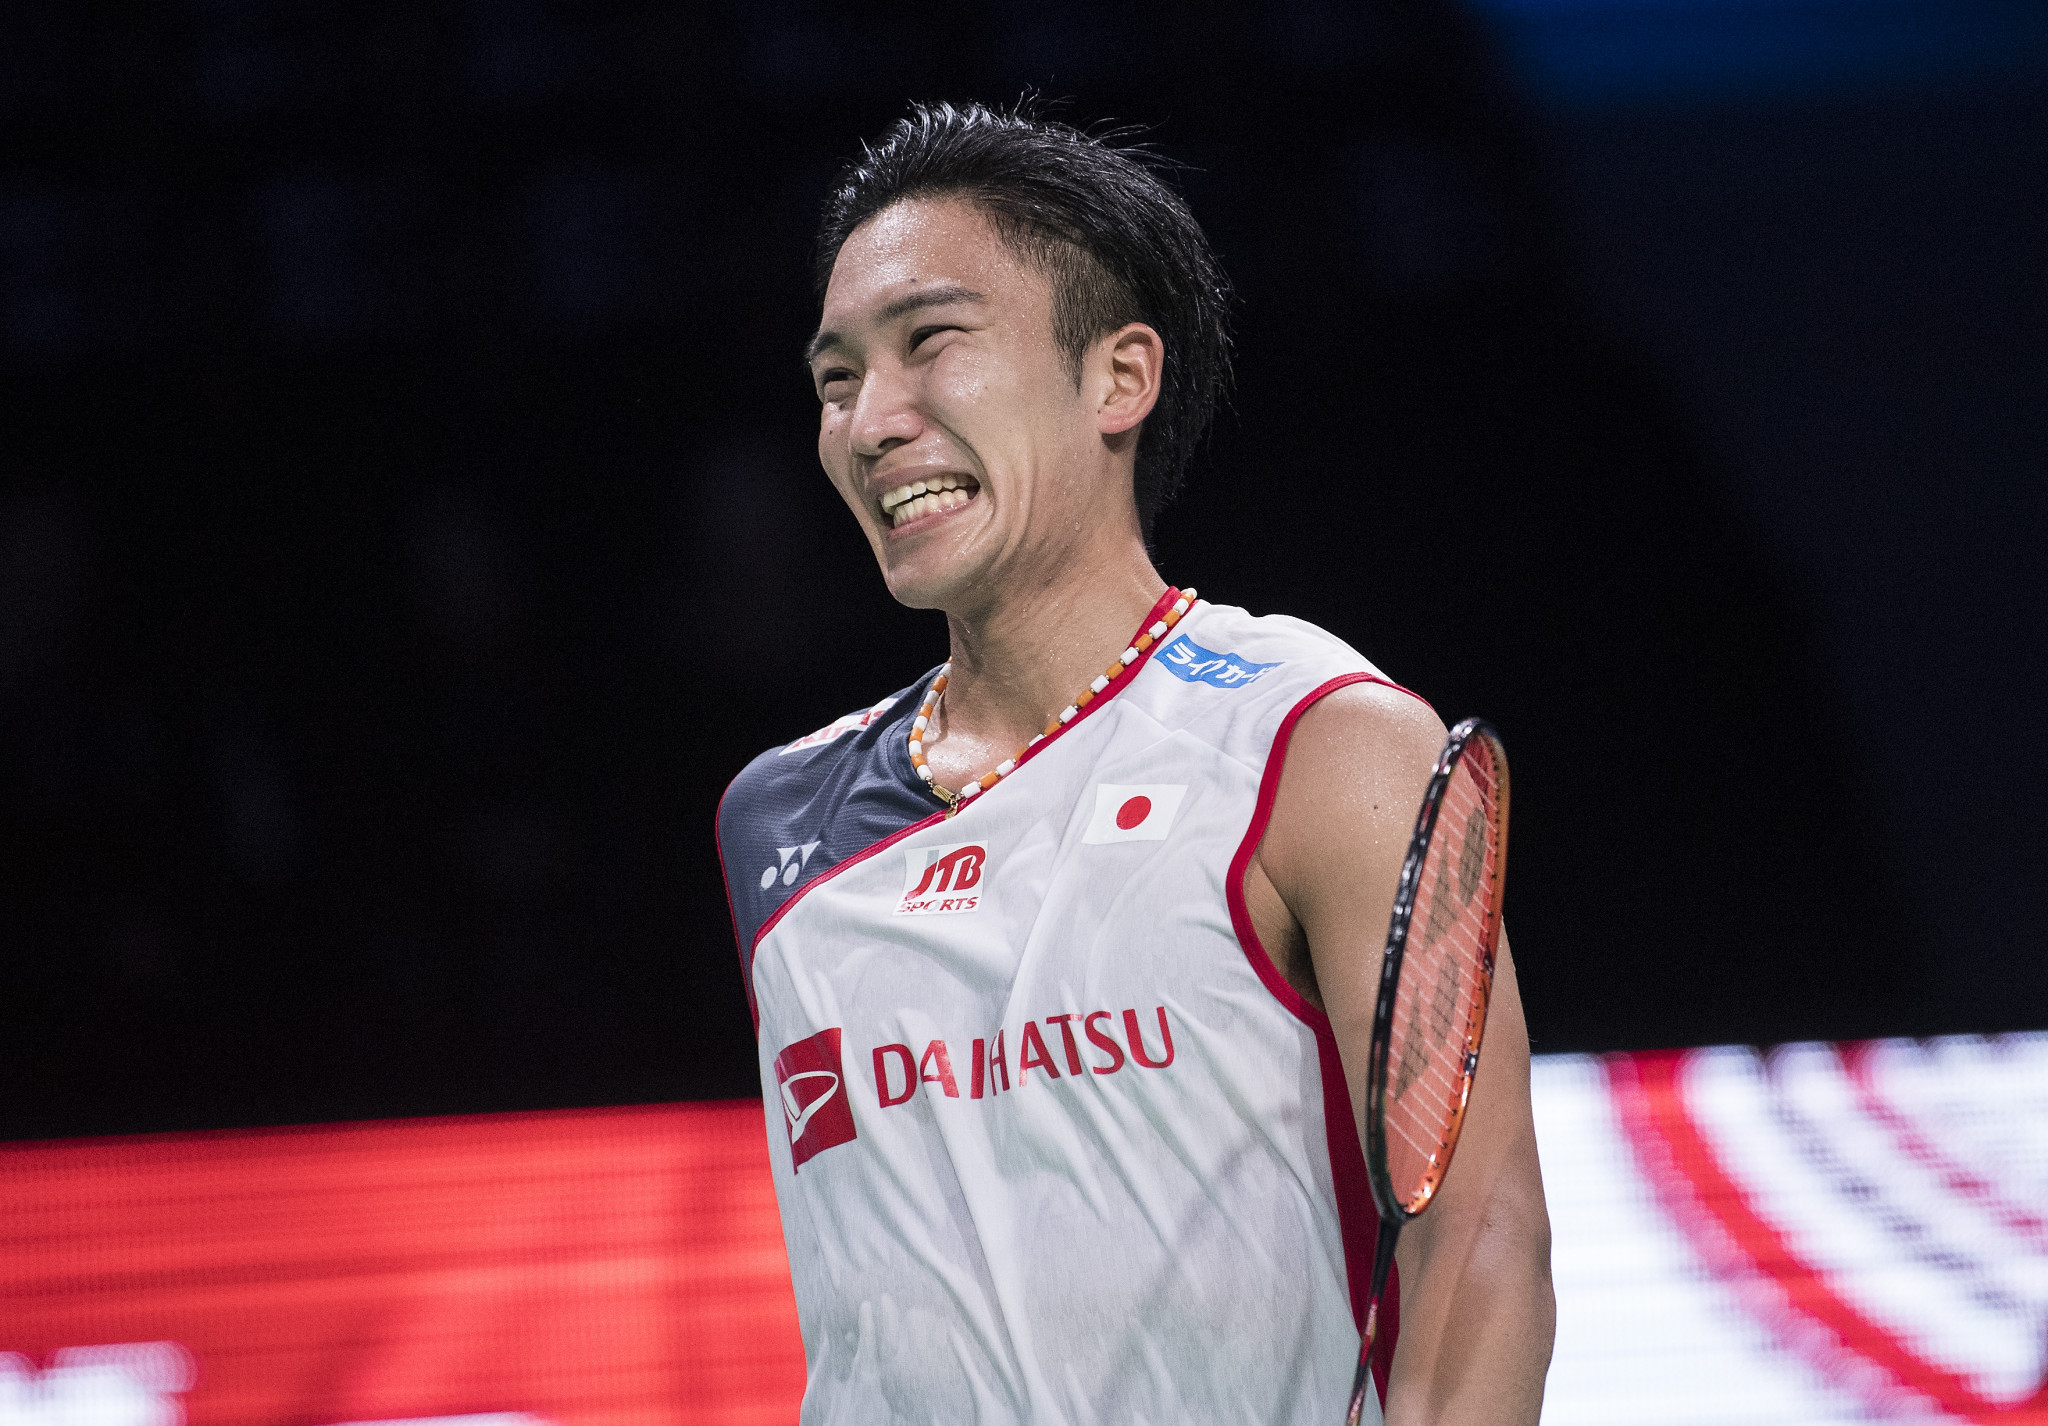 Kento Momota will play Lin Dan in a plumb first round match ©Getty Images